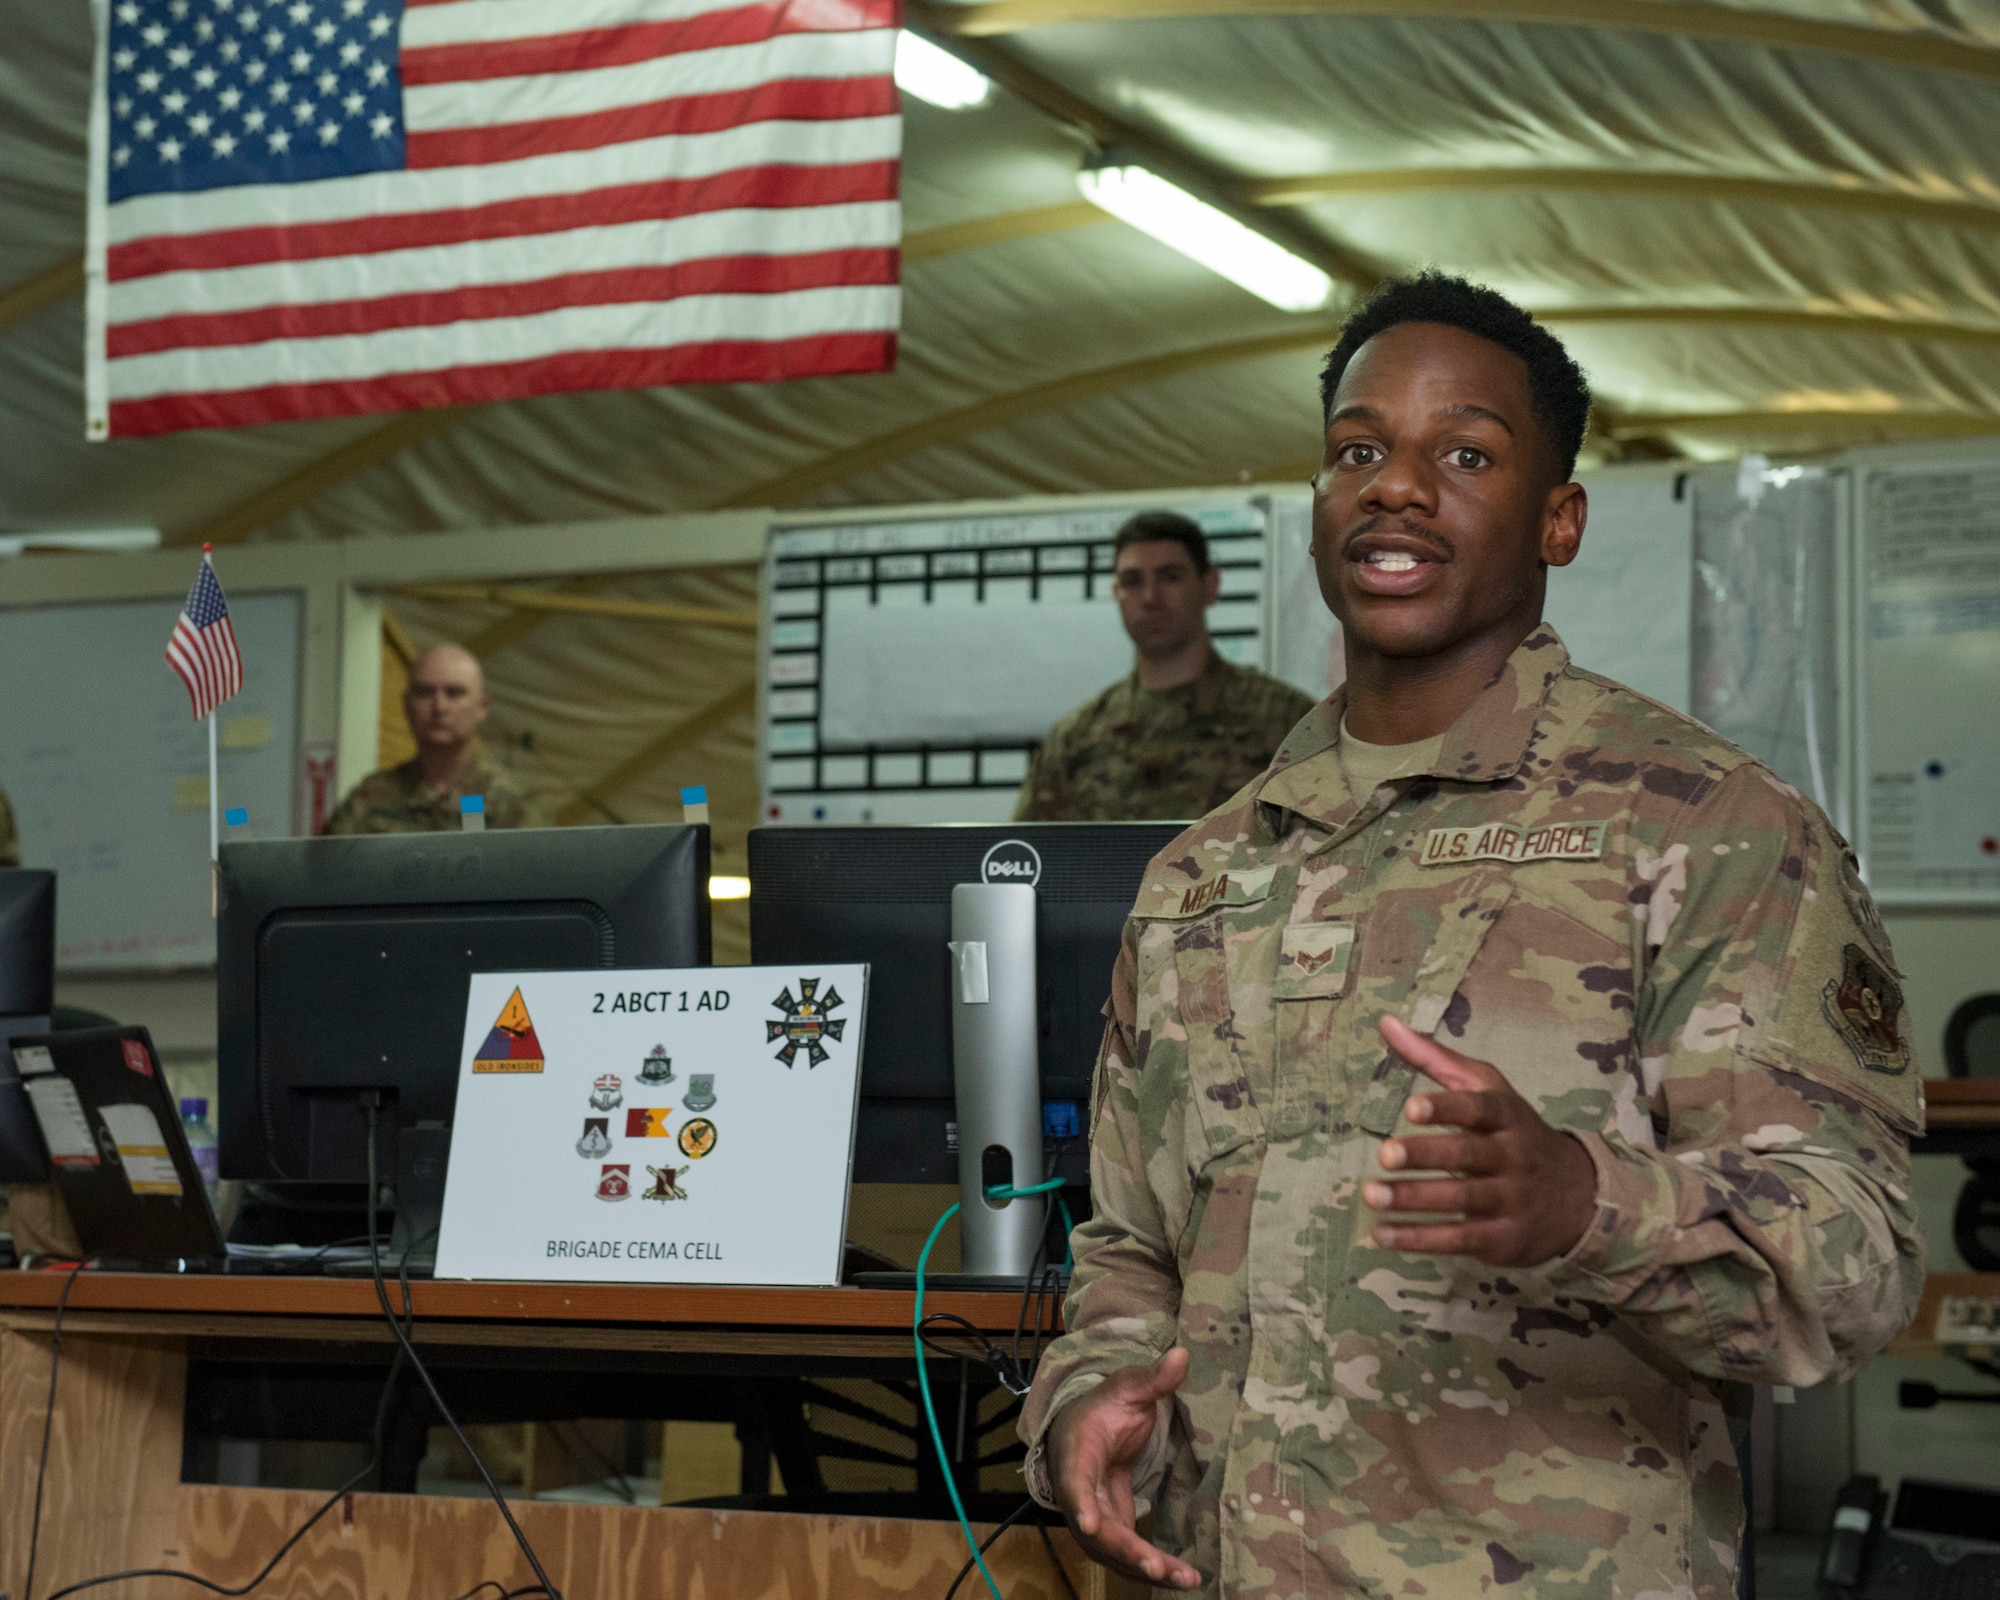 U.S. Air Force Senior Airman Marquise Meda, 22nd Expeditionary Weather Squadron combat weather forecaster, briefs a unit at Camp Buehring, Kuwait, Oct. 2, 2020.